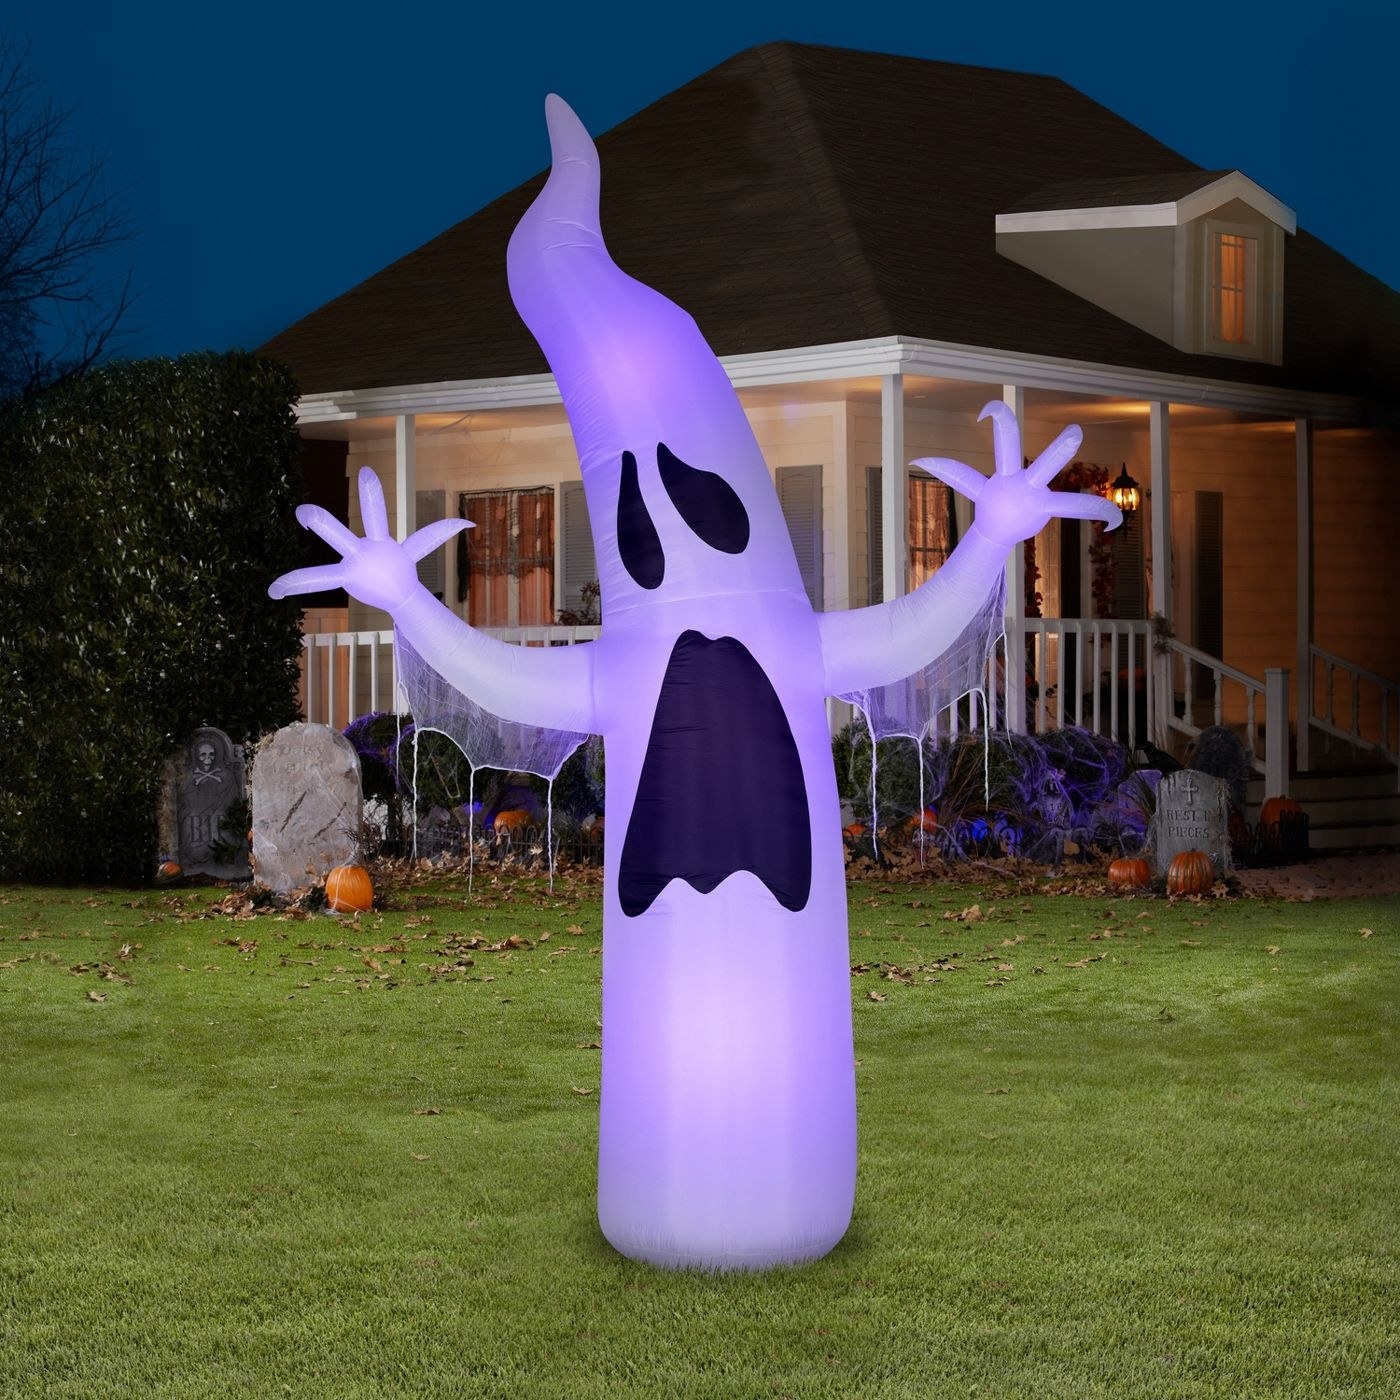 An inflatable ghost